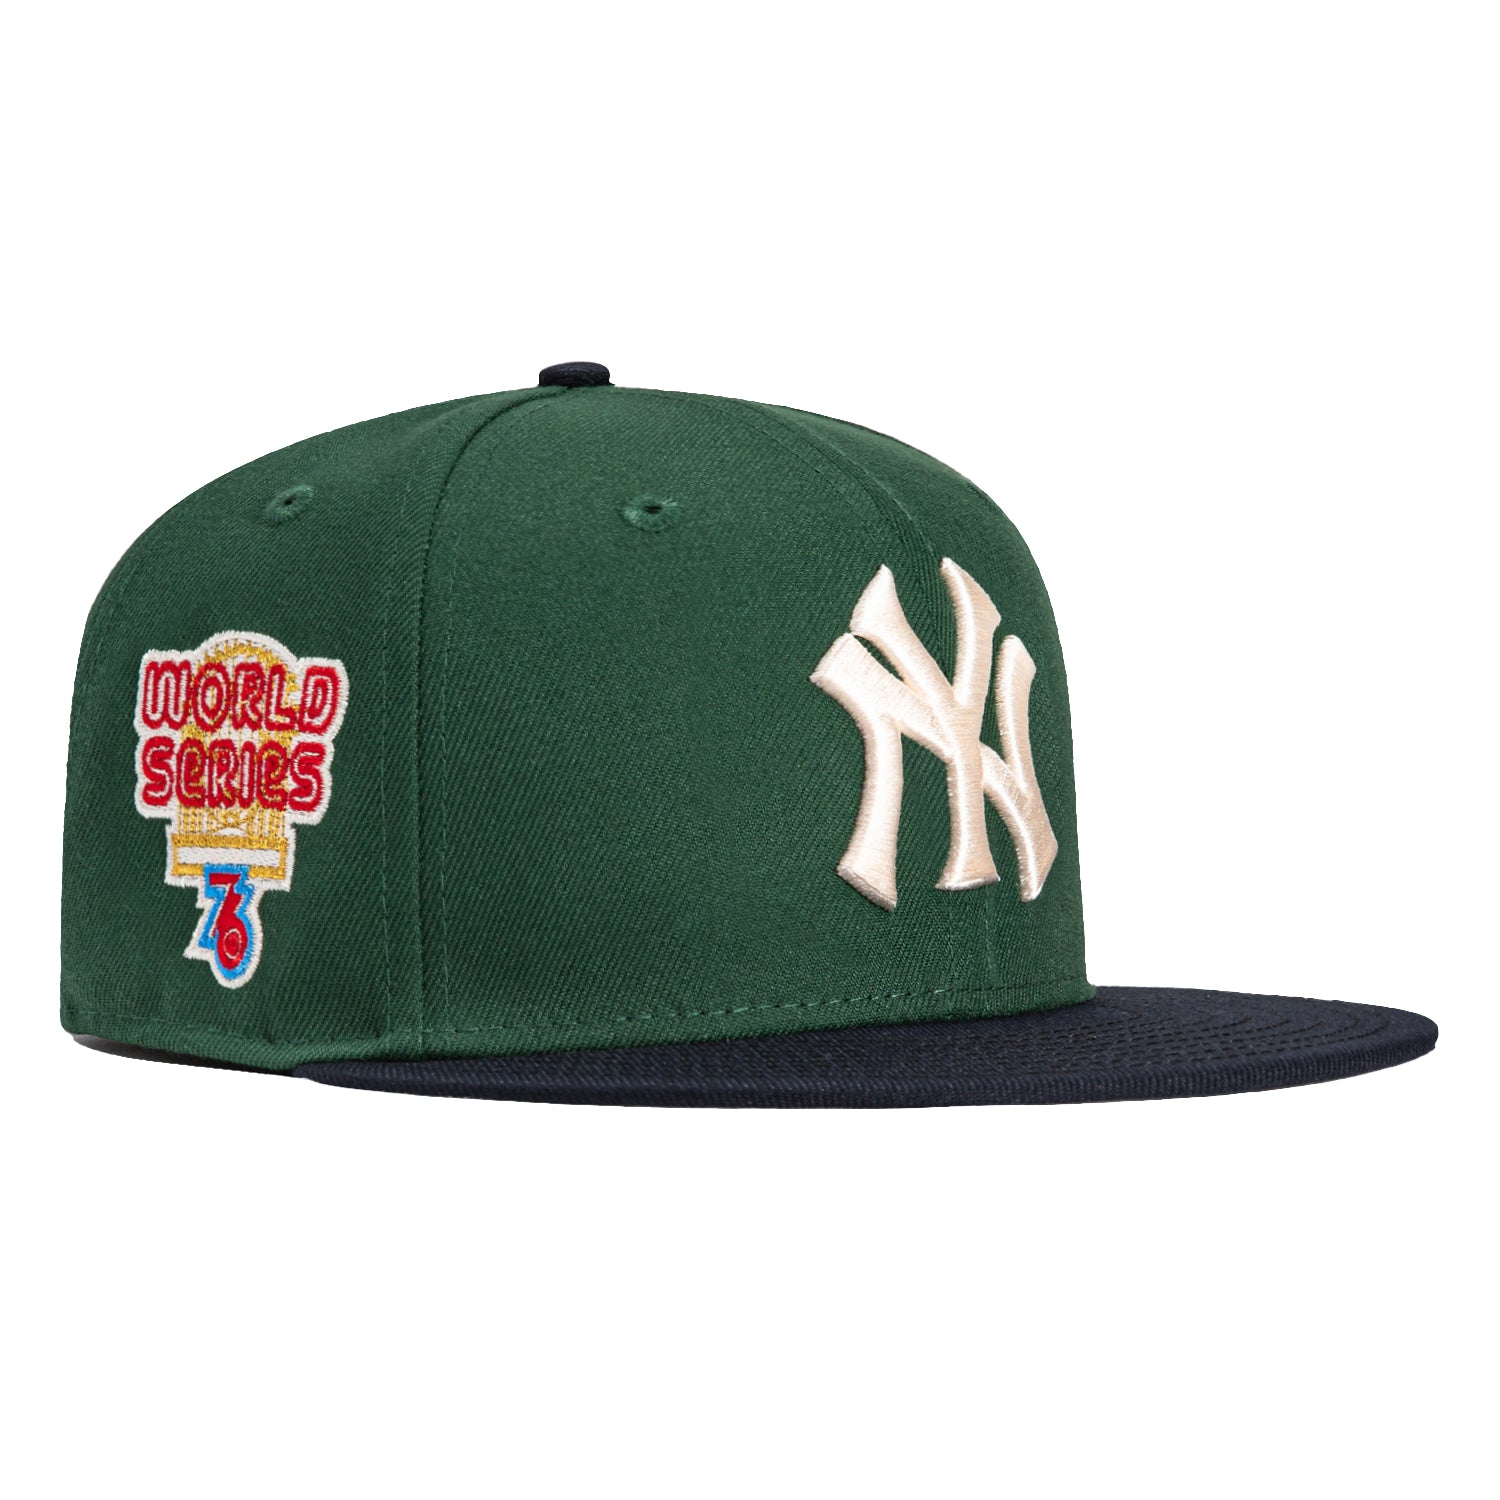 New Era 59Fifty New York Yankees 1976 World Series Patch Hat - Green,